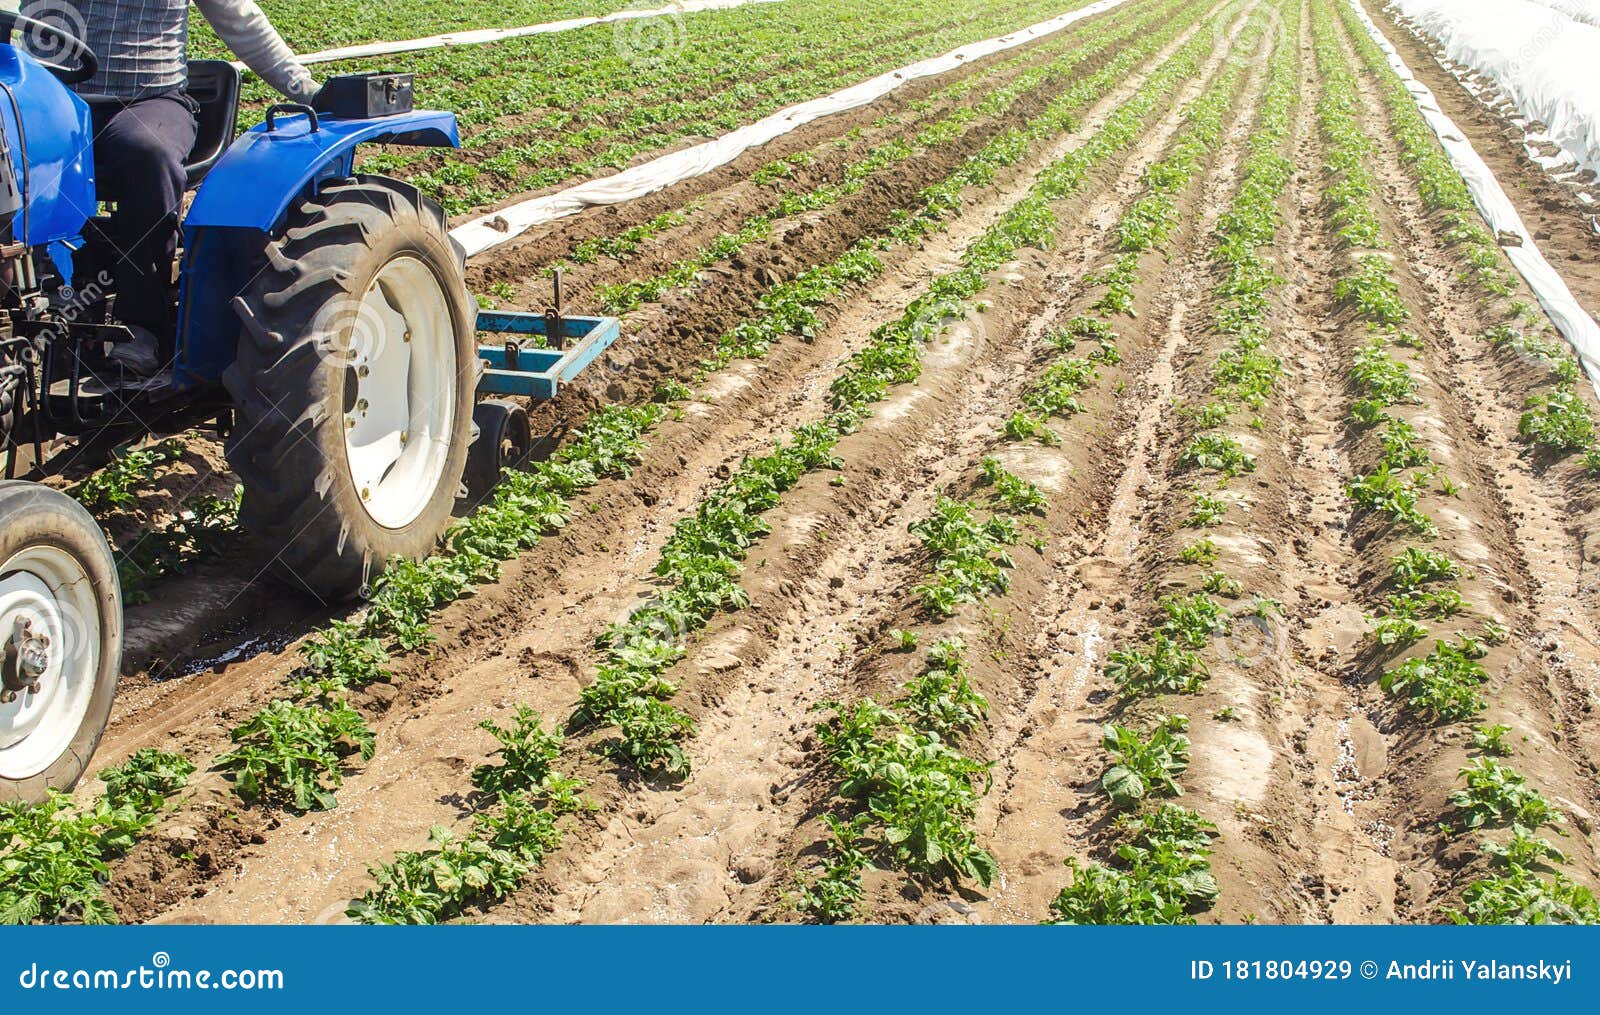 a tractor plows the soil between the rows of a potato plantation. crop care. improving quality of ground to allow water and